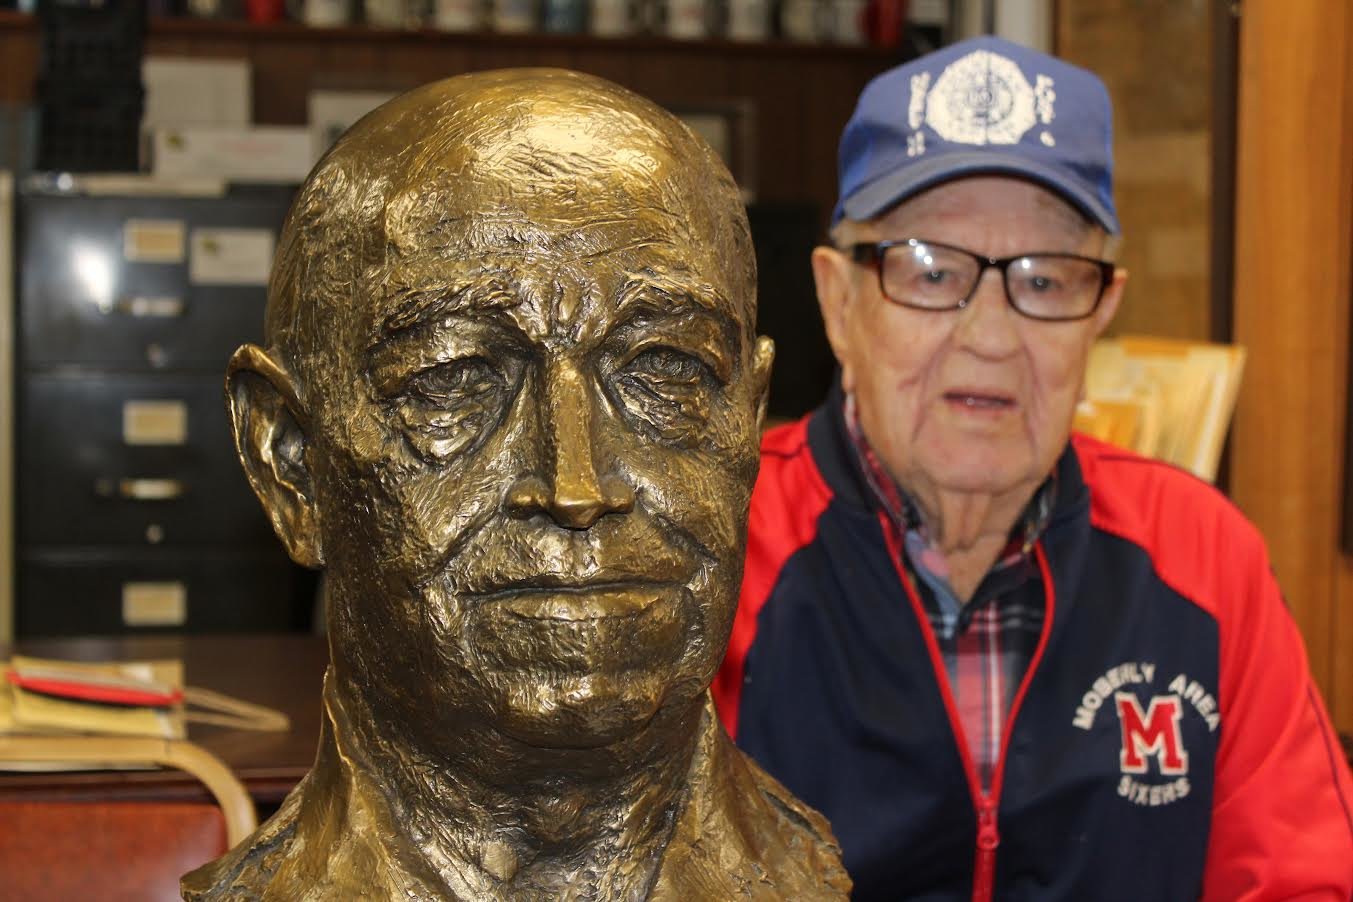 Veteran Donald P. Fuller, I, American Legion Post 6 finance officer, sits next to the bust of General of the Army Omar N. Bradley at the Randolph County Historical Museum & Genealogy Center. The bust was donated to the Randolph County Historical Society by The Chosin Few, survivors of the Battle of Chosin Reservoir (1950) during the Korean War. (Joe Barnes)